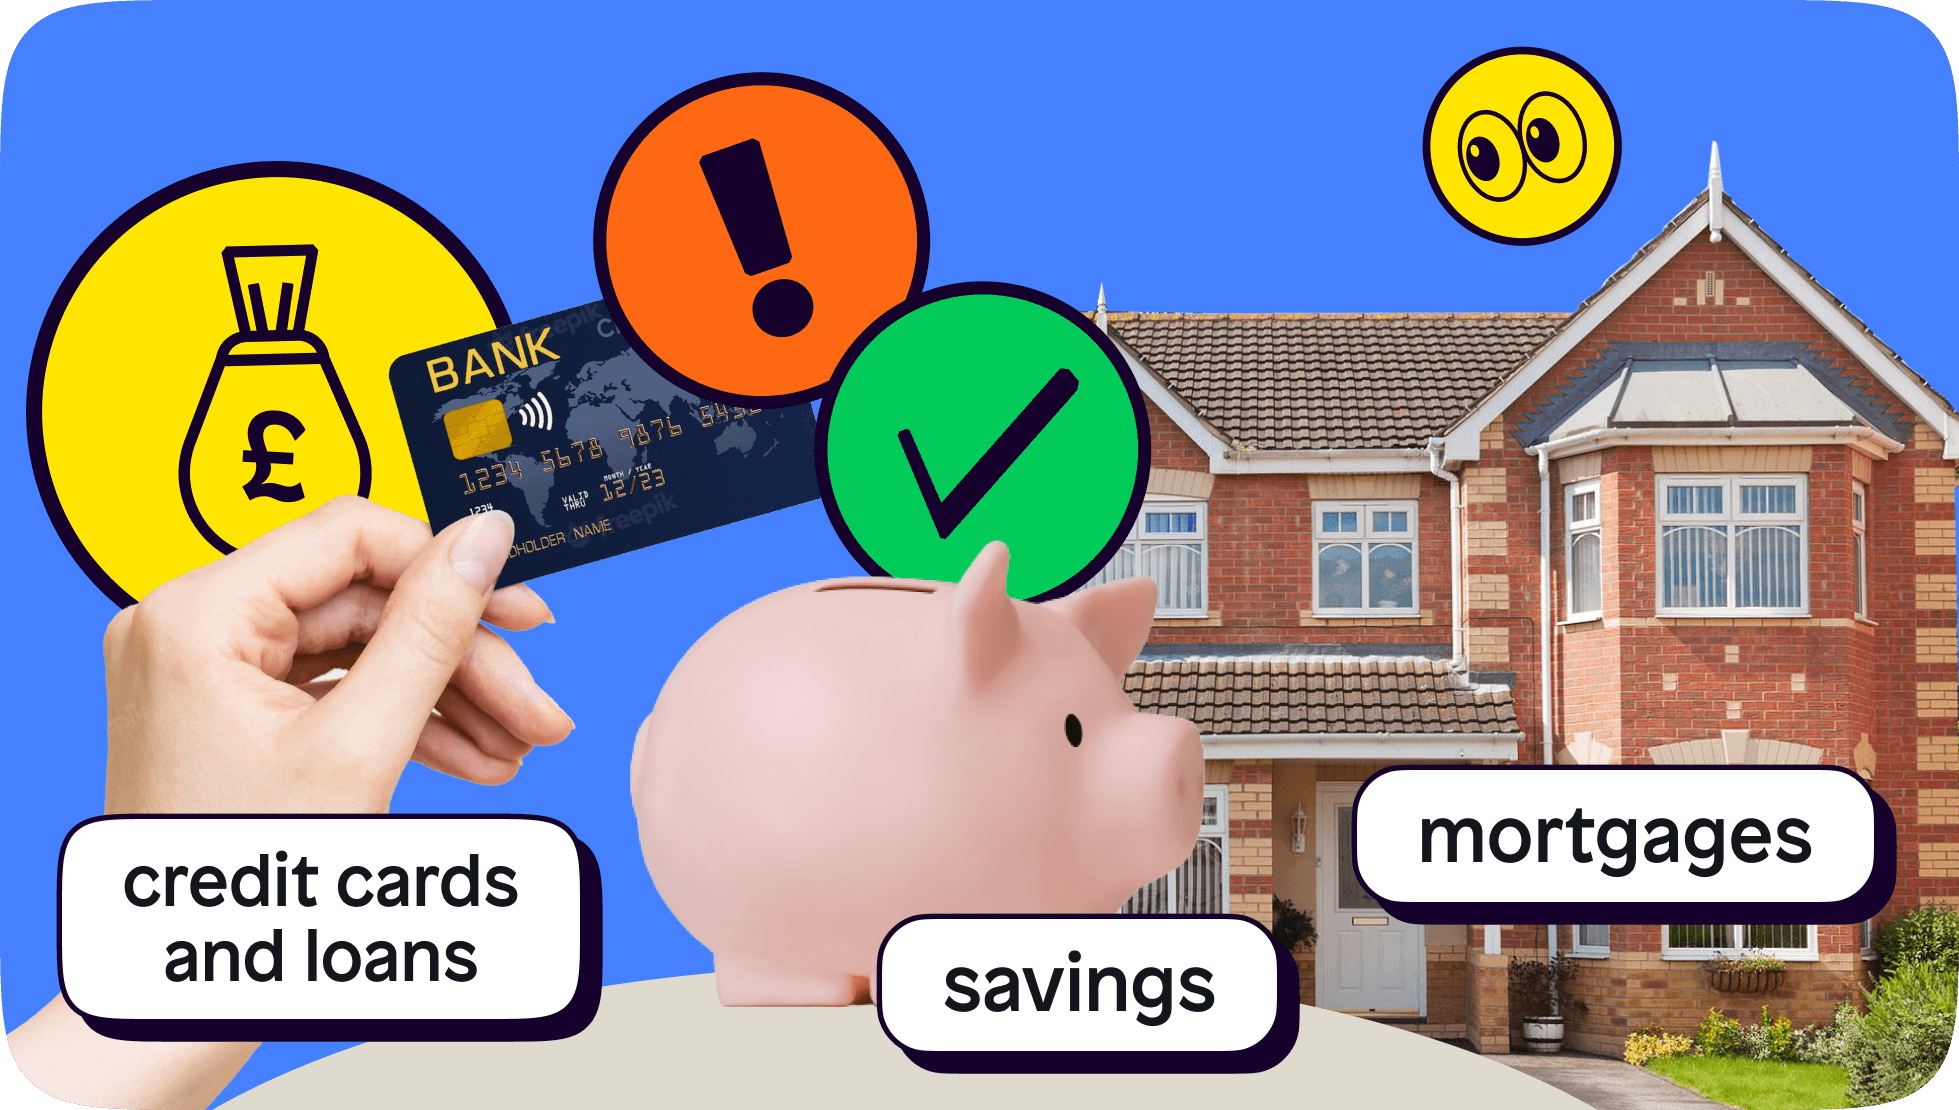 How do high interest rates affect mortgages, credit card loans and savings accounts